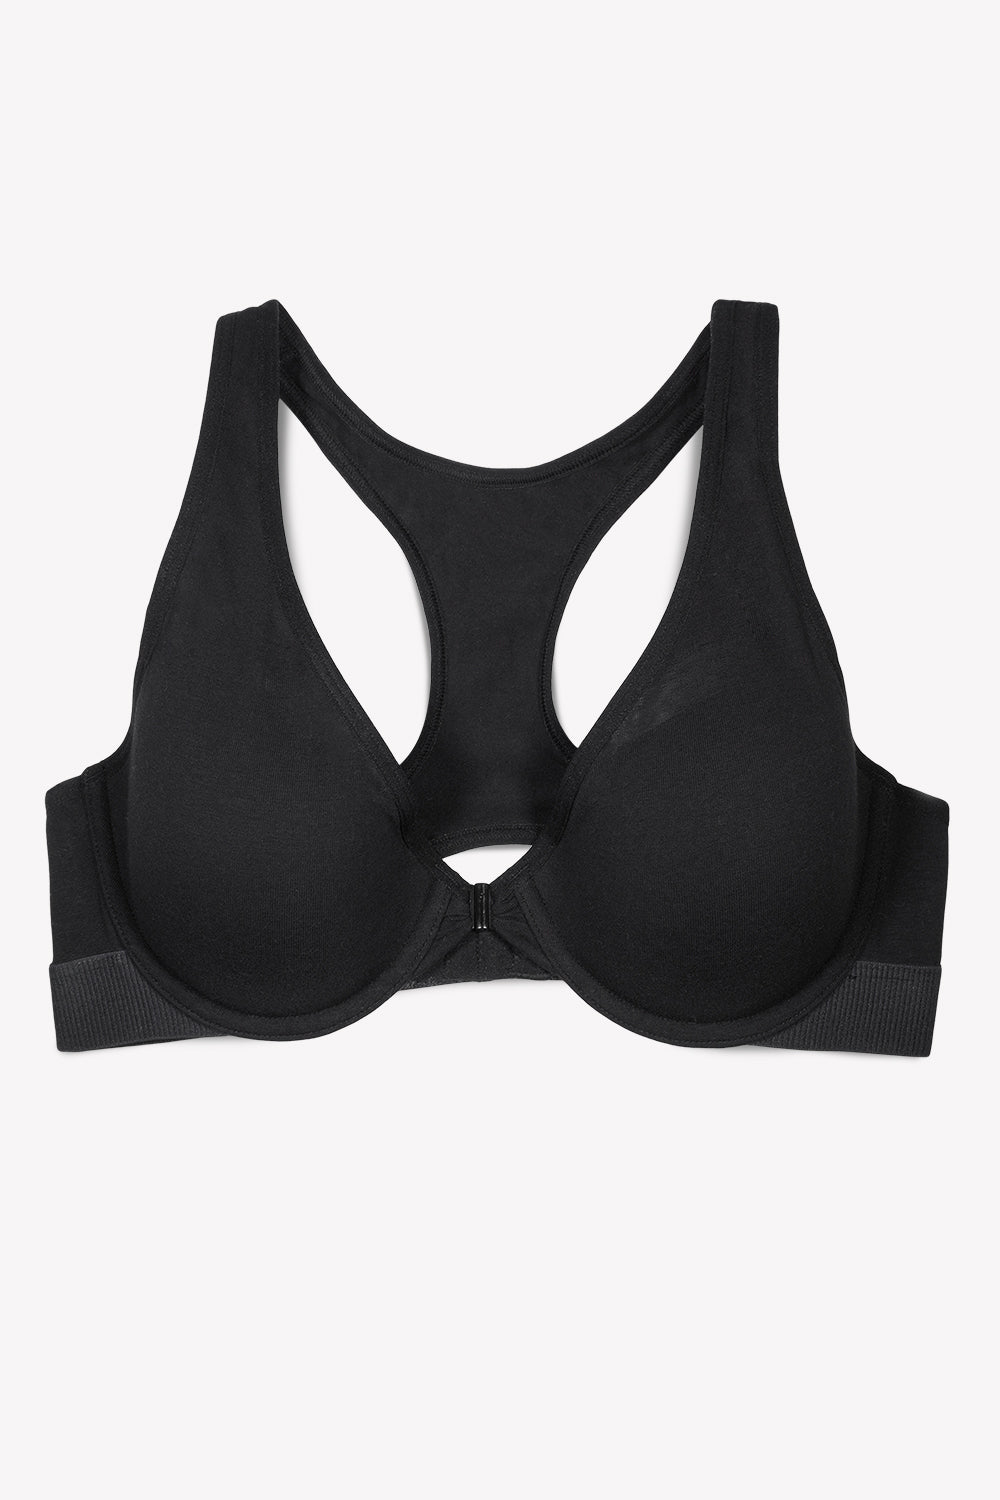 Lingesxy Racerback Bra, Push Up Front Closure Underwire Bra Add 2 Cups  Black at  Women's Clothing store